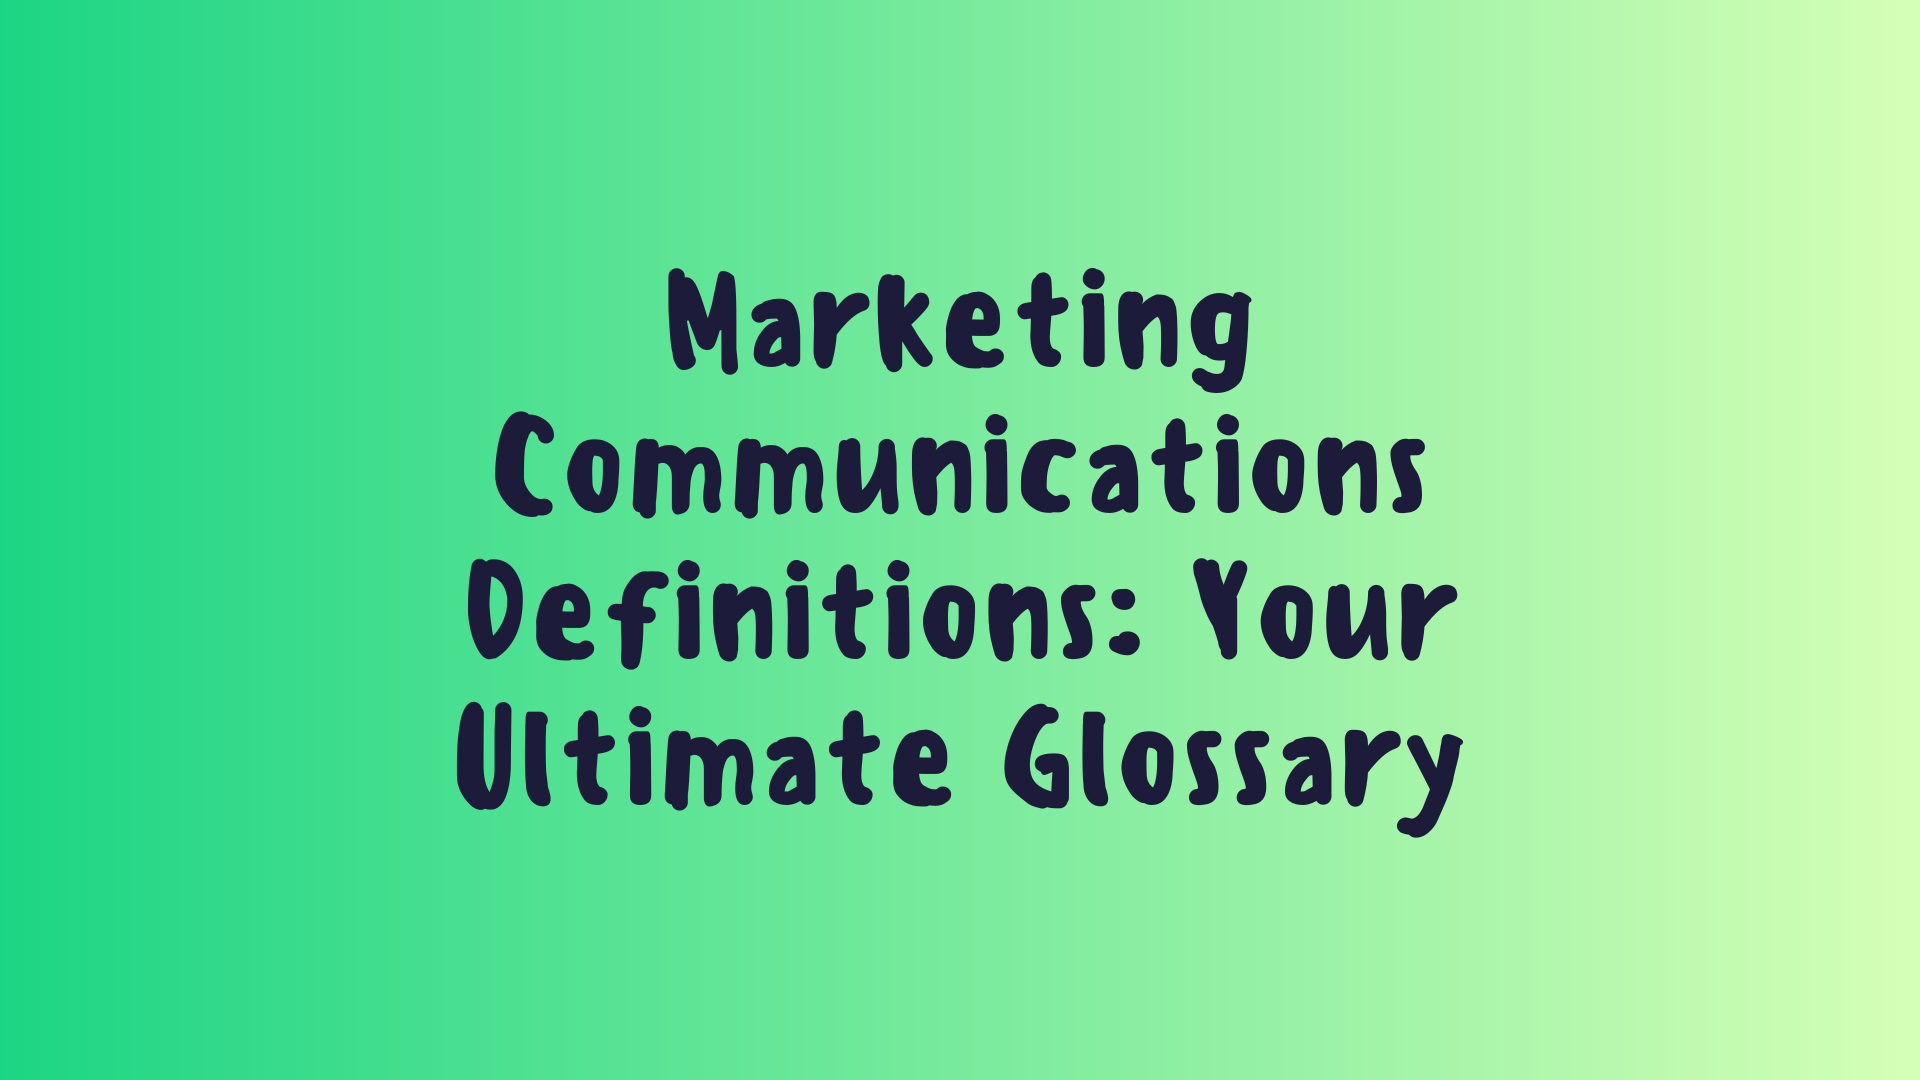 Marketing Communications Definitions: Your Ultimate Glossary